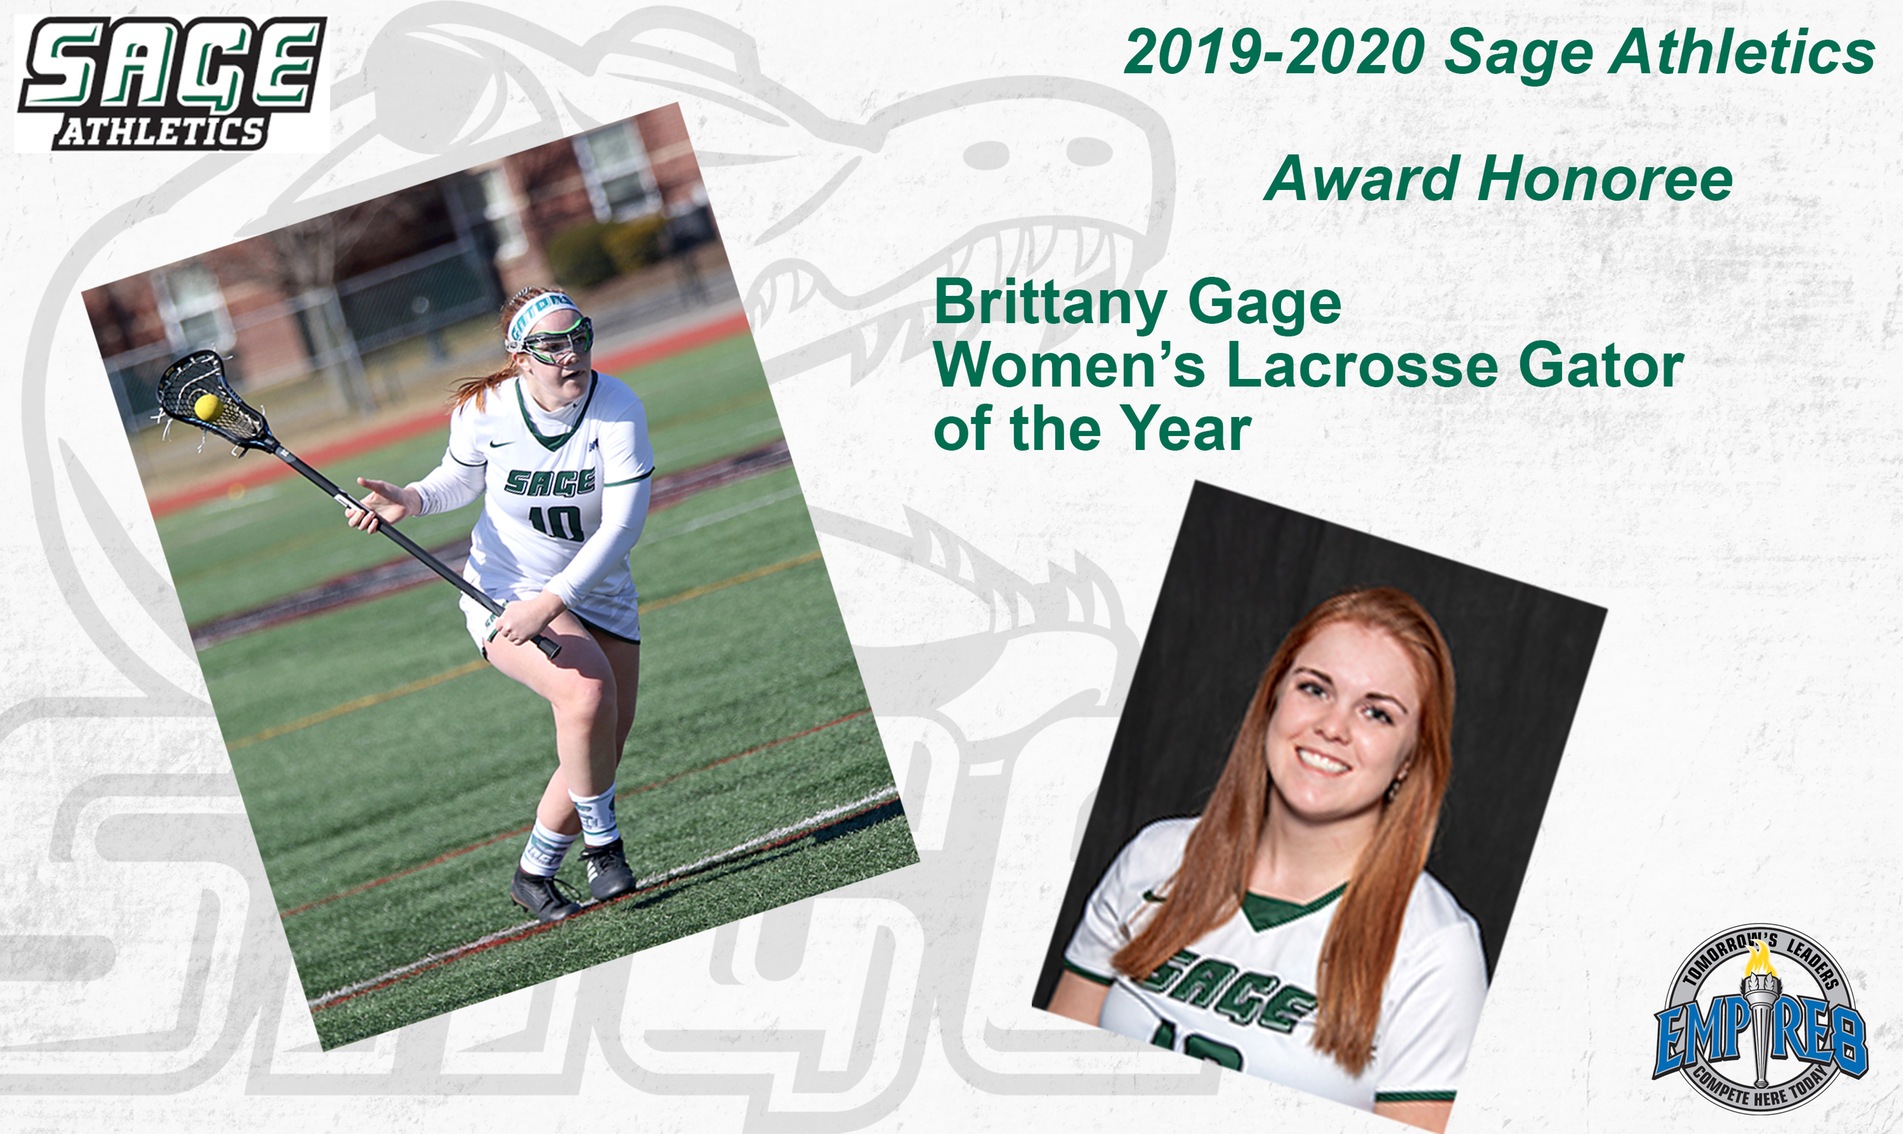 Brittany Gage named Women's Lacrosse Gator of the Year